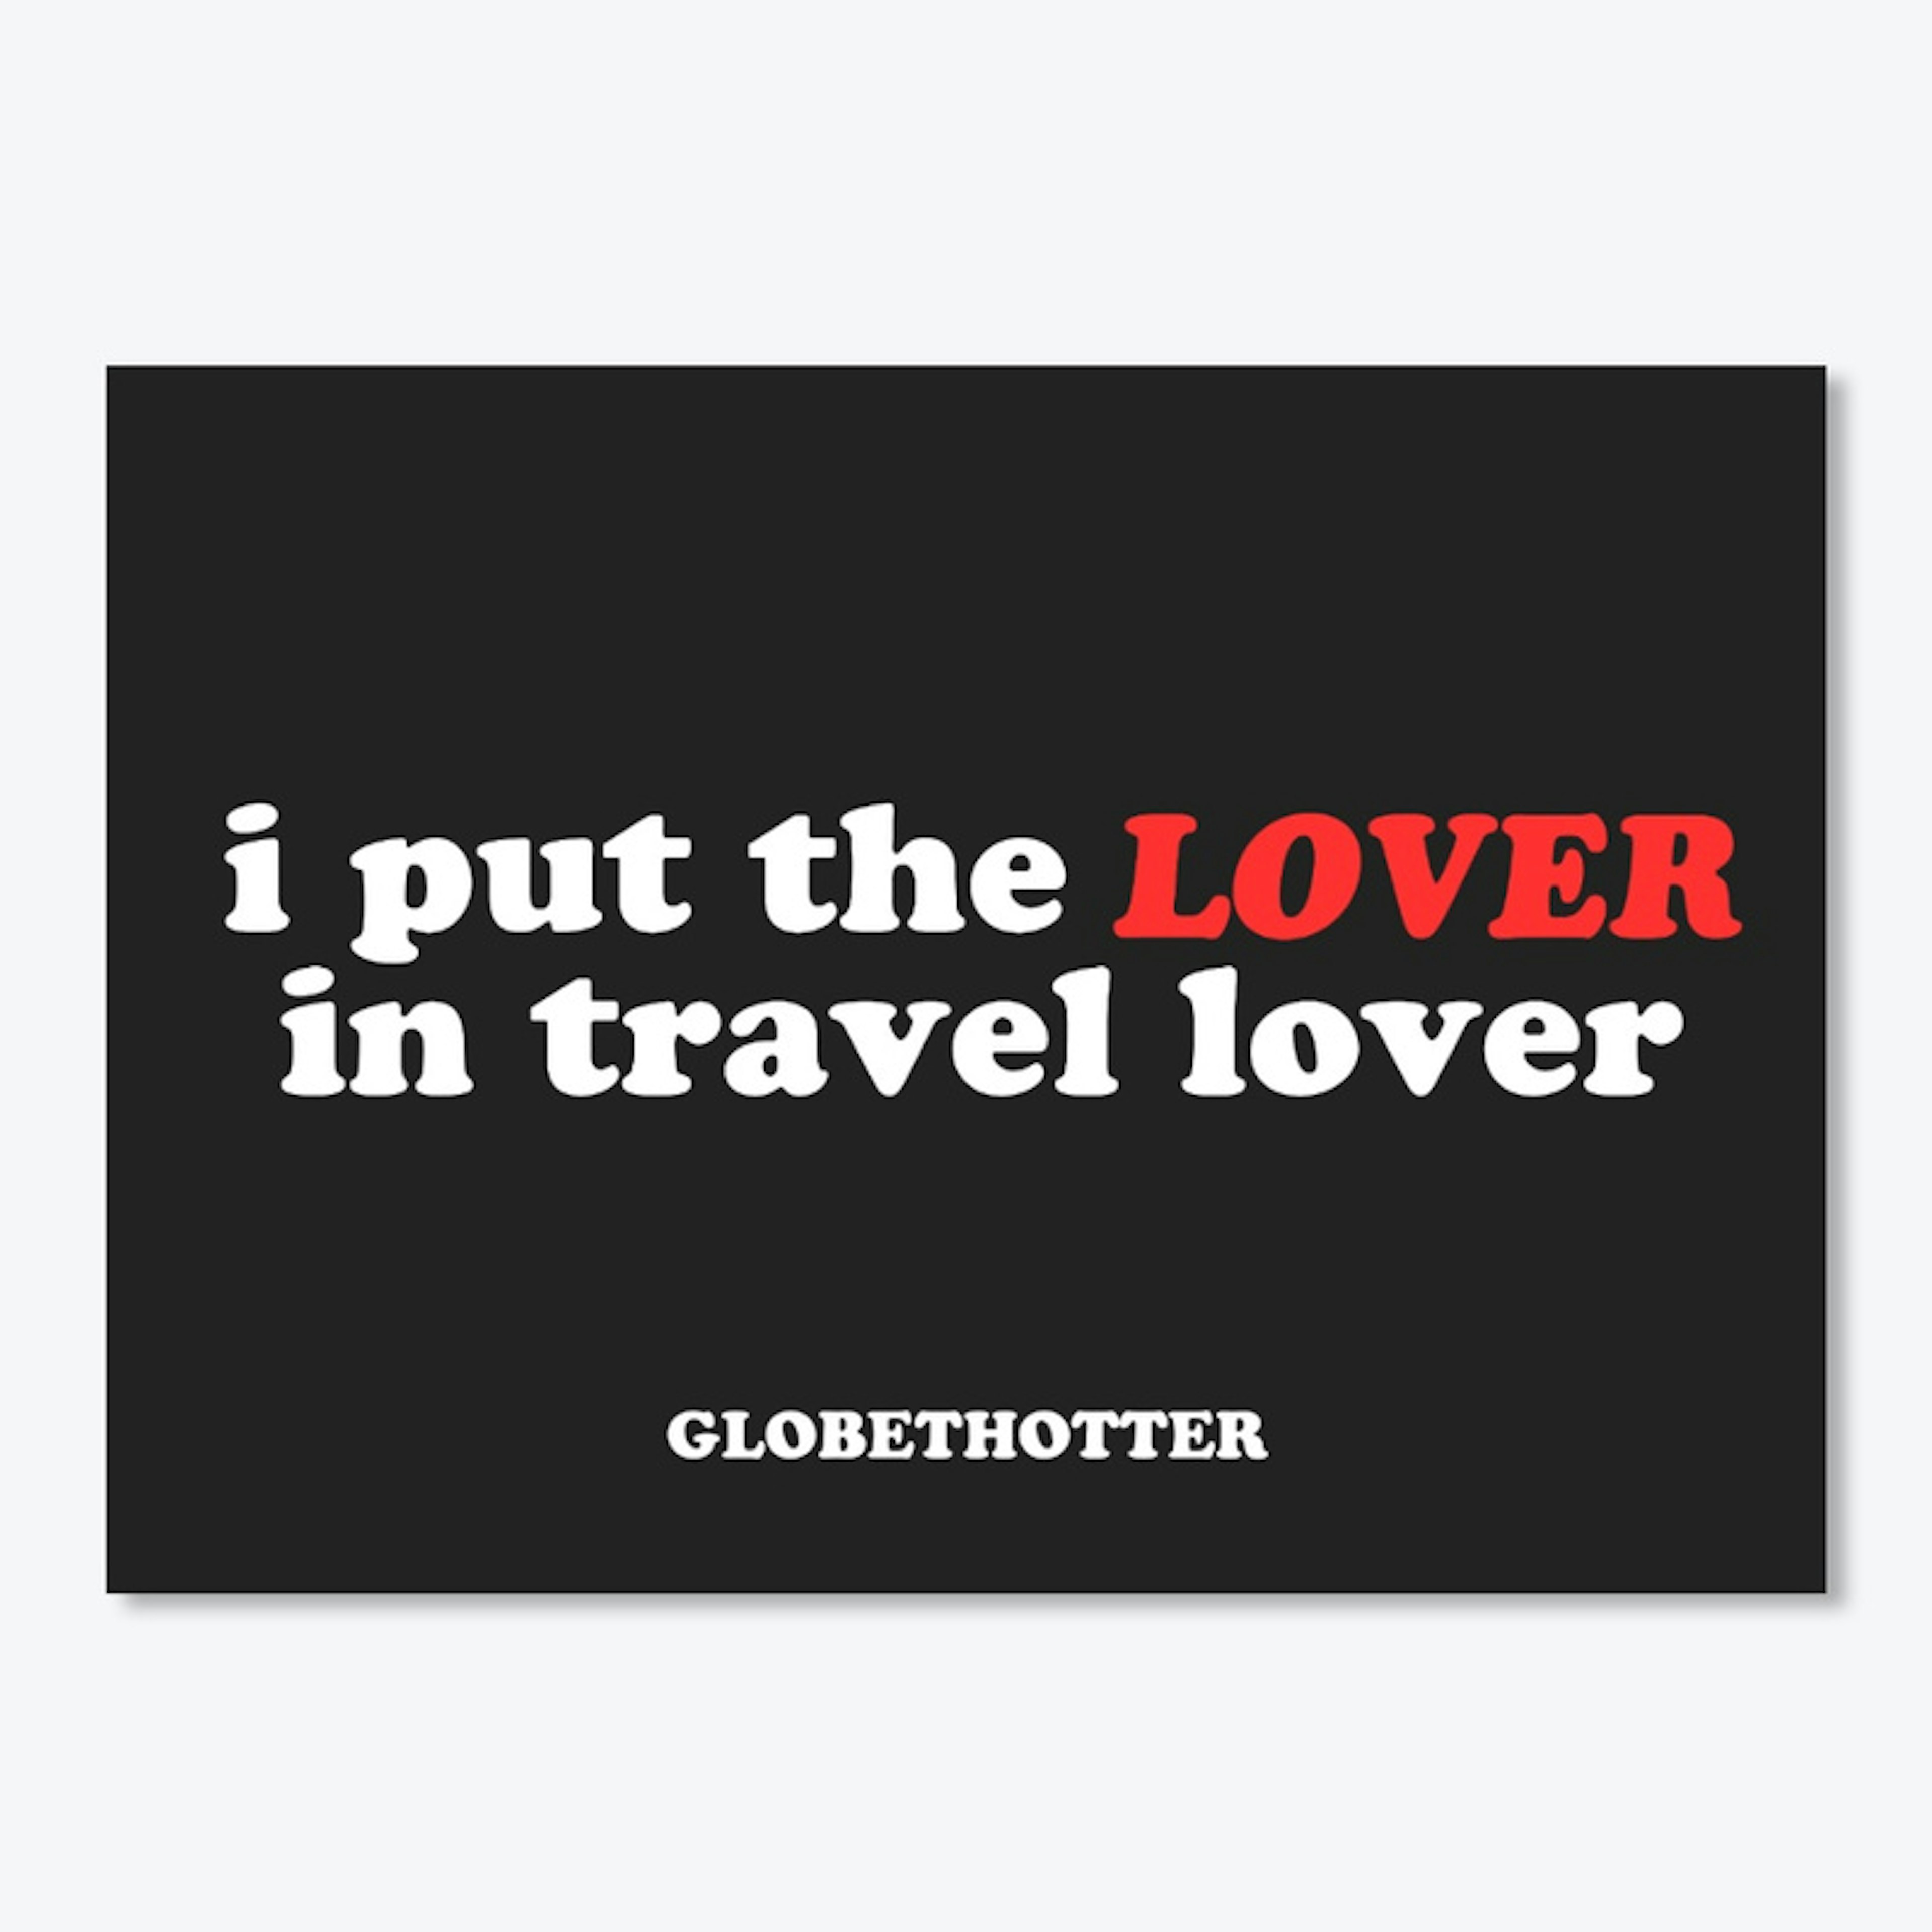 Putting the Lover in Travel Lover